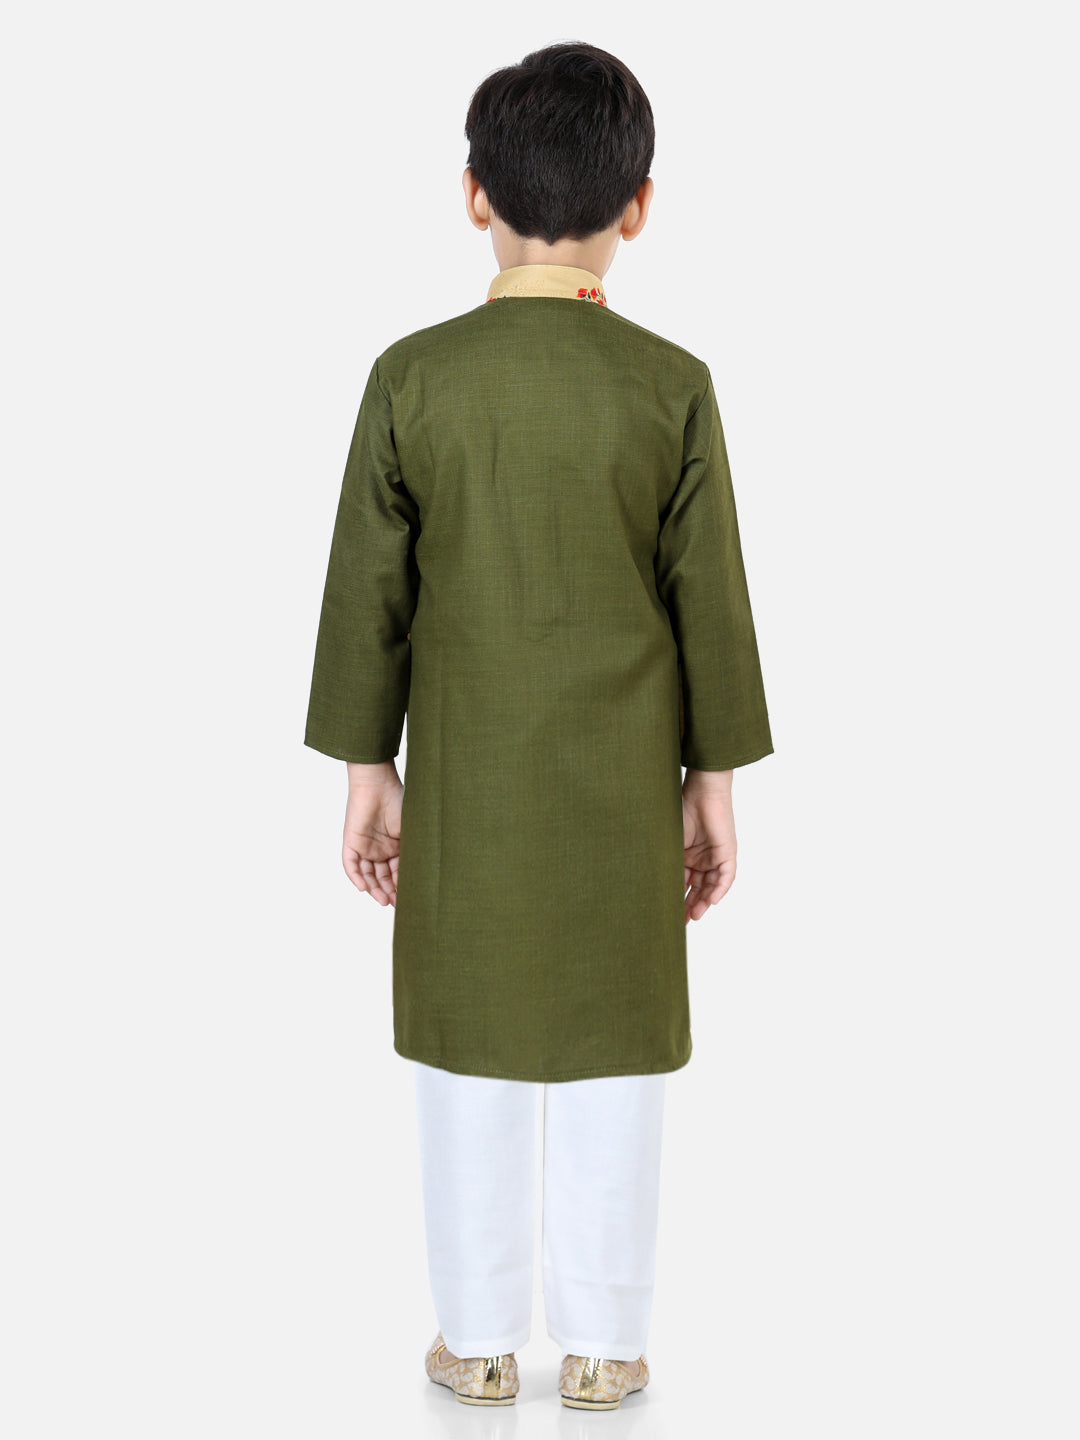 Printed Attached Jacket Cotton Kurta Pajama for Boys- Green NOZ2TOZ - Made In INDIA.